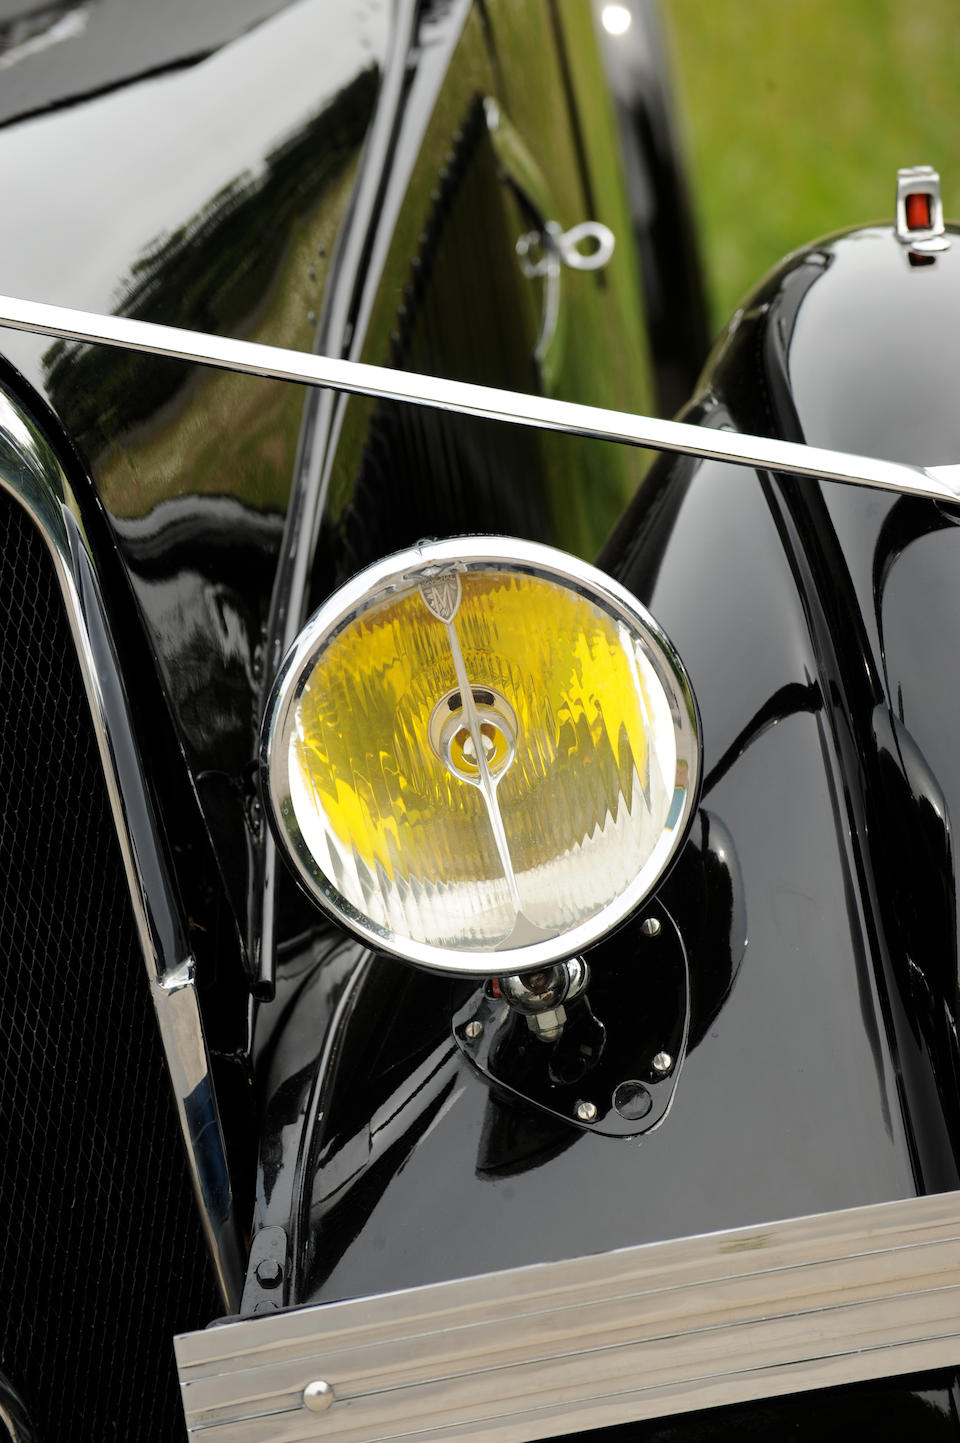 One of two existing, once owned by Gabriel Voisin ,1935 Avions Voisin C28 Clairi&#232;re  Chassis no. CG 28917 Engine no. 53010